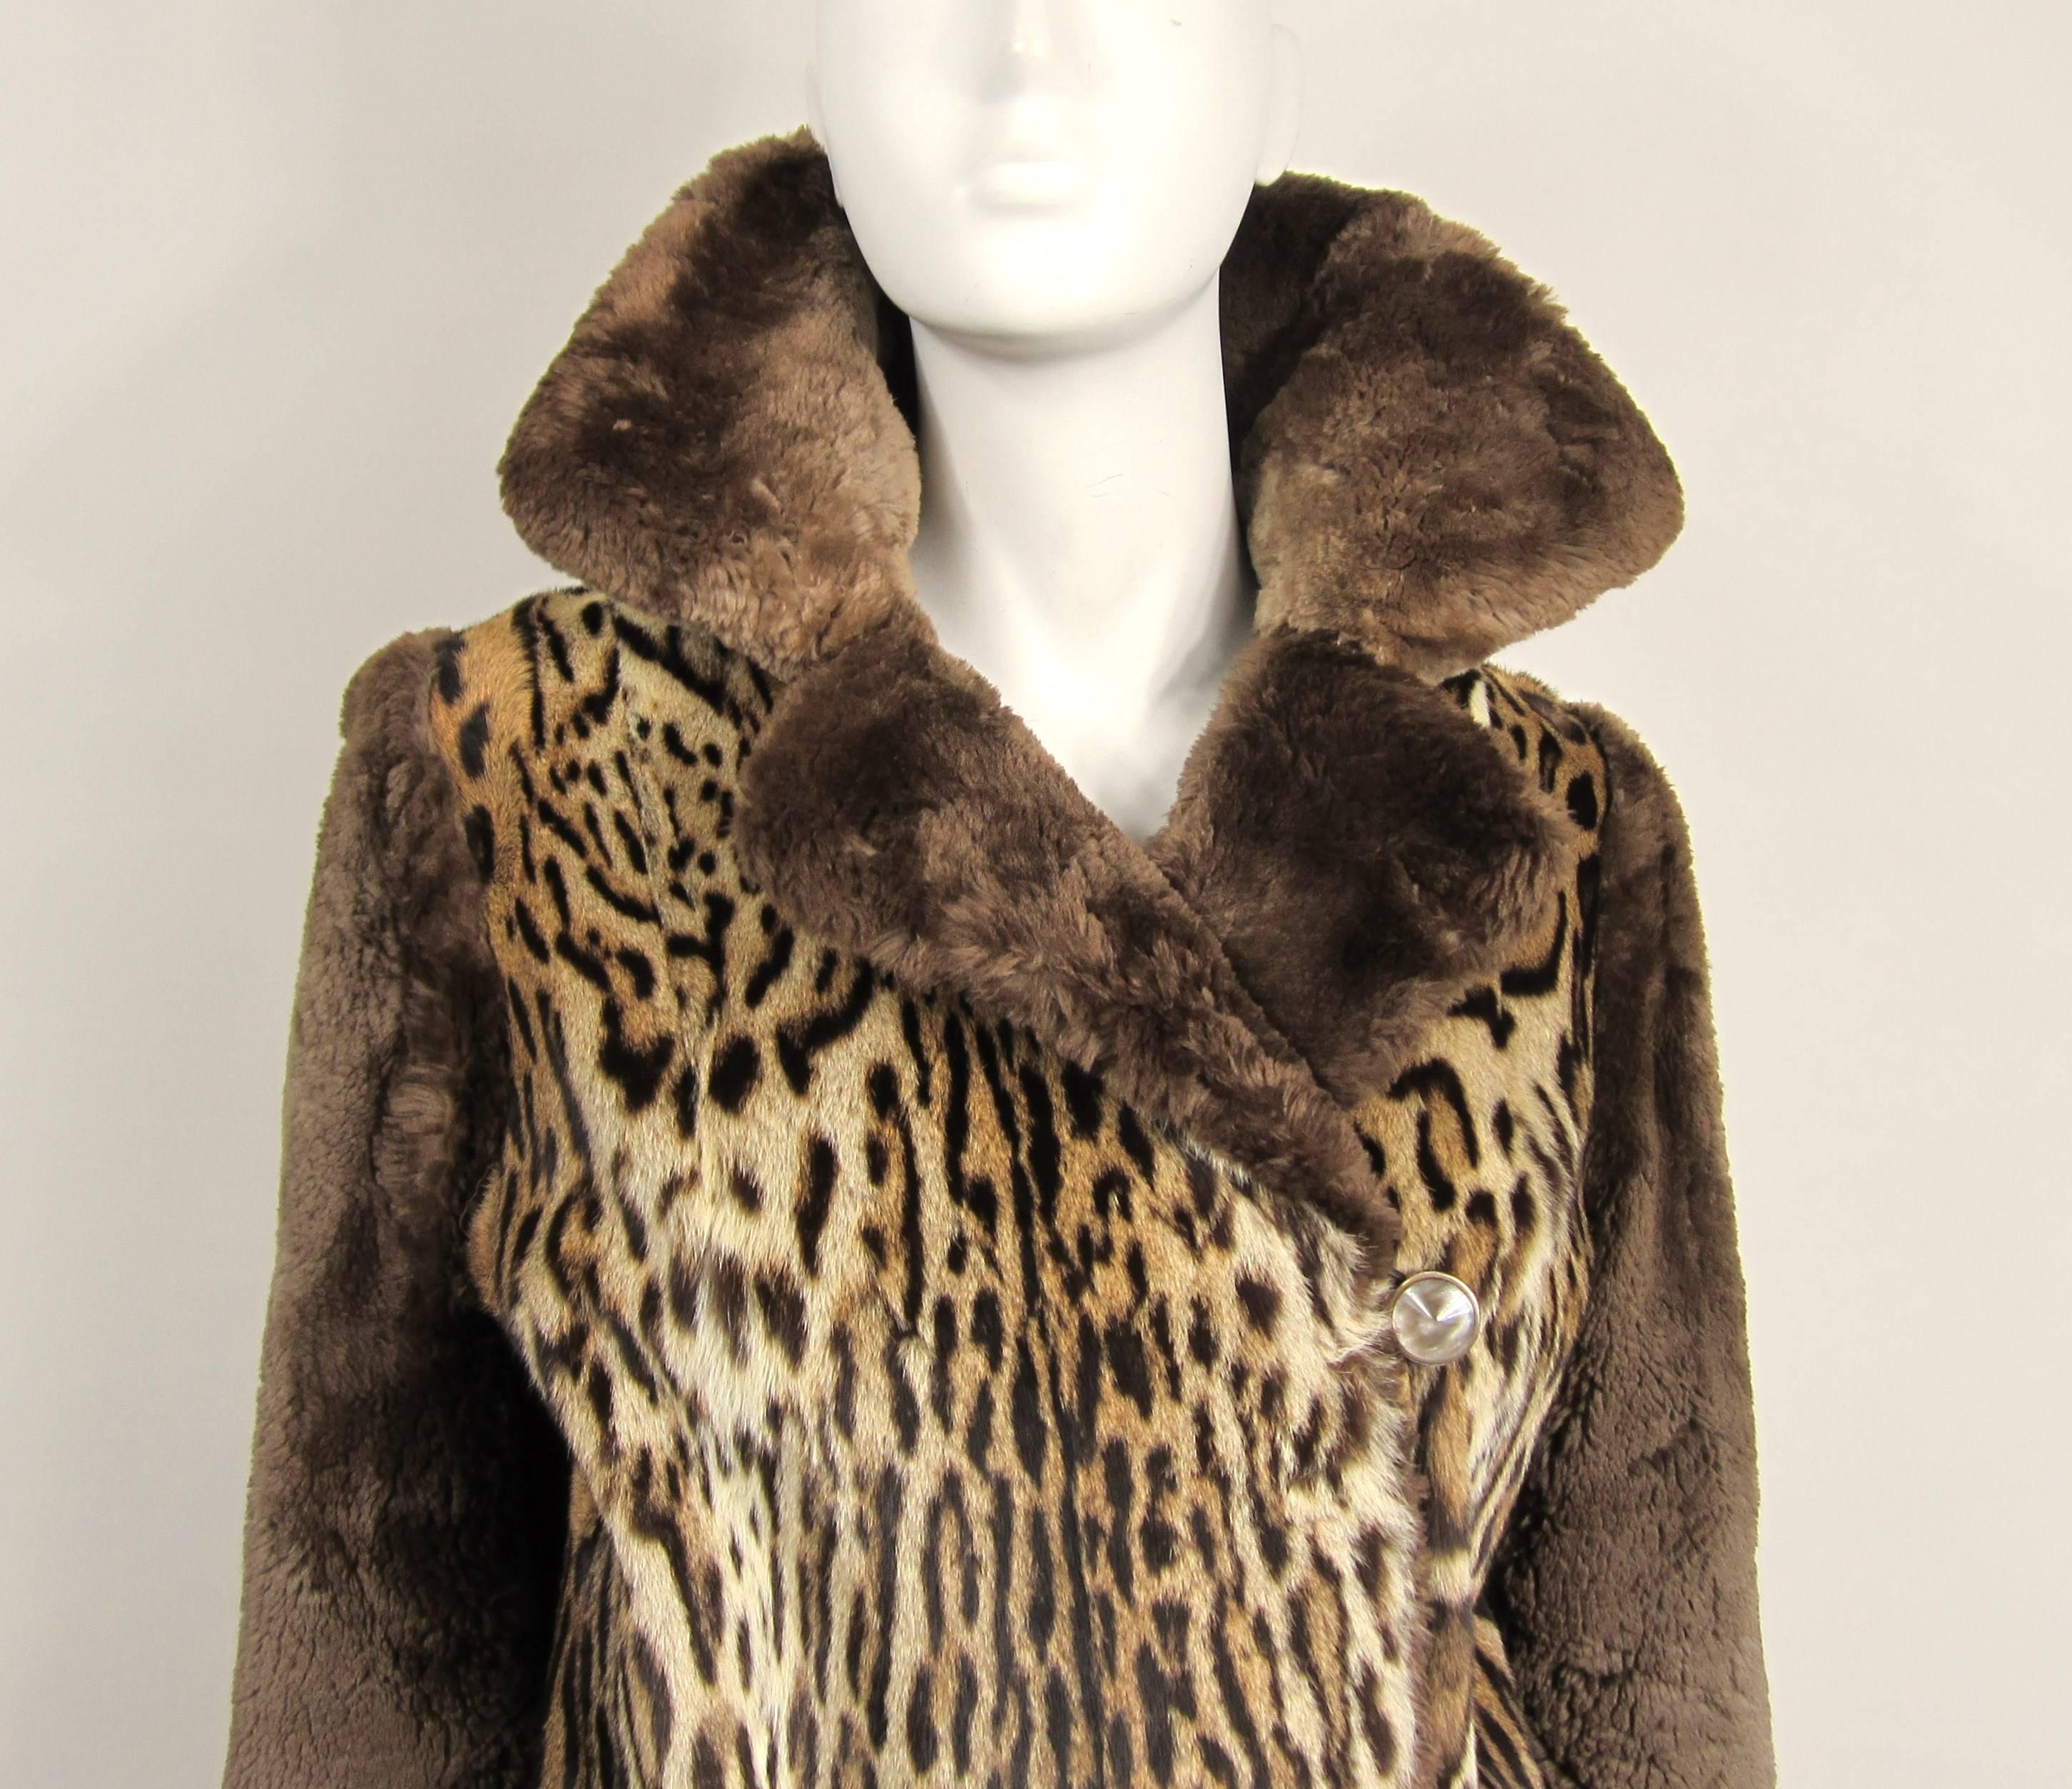 Wow. This is a stunning 1940s two fur jacket By M Blaustein of Short Hills. 2 slit pockets with 4 button closure that extends up to your neck. Monogrammed on the lining. Beige lining. Soft supple fur. Statement piece for sure. Will fit a 4-6 nicely,